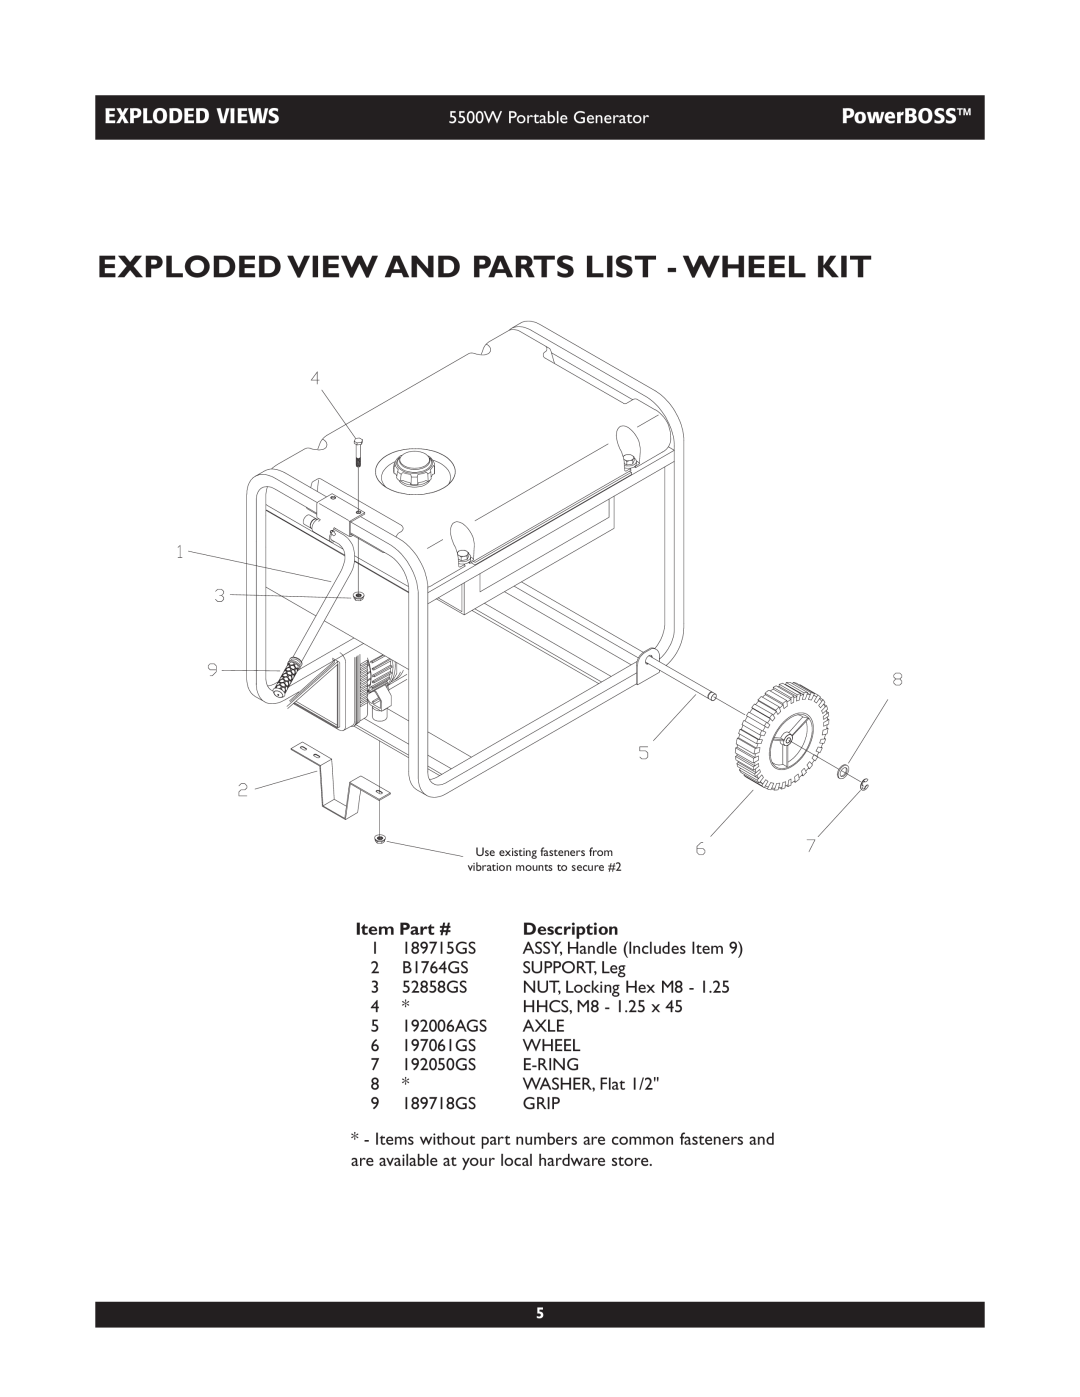 Briggs & Stratton 30255 Exploded View And Parts List - Wheel Kit, Exploded Views, PowerBOSS, 5500W Portable Generator 